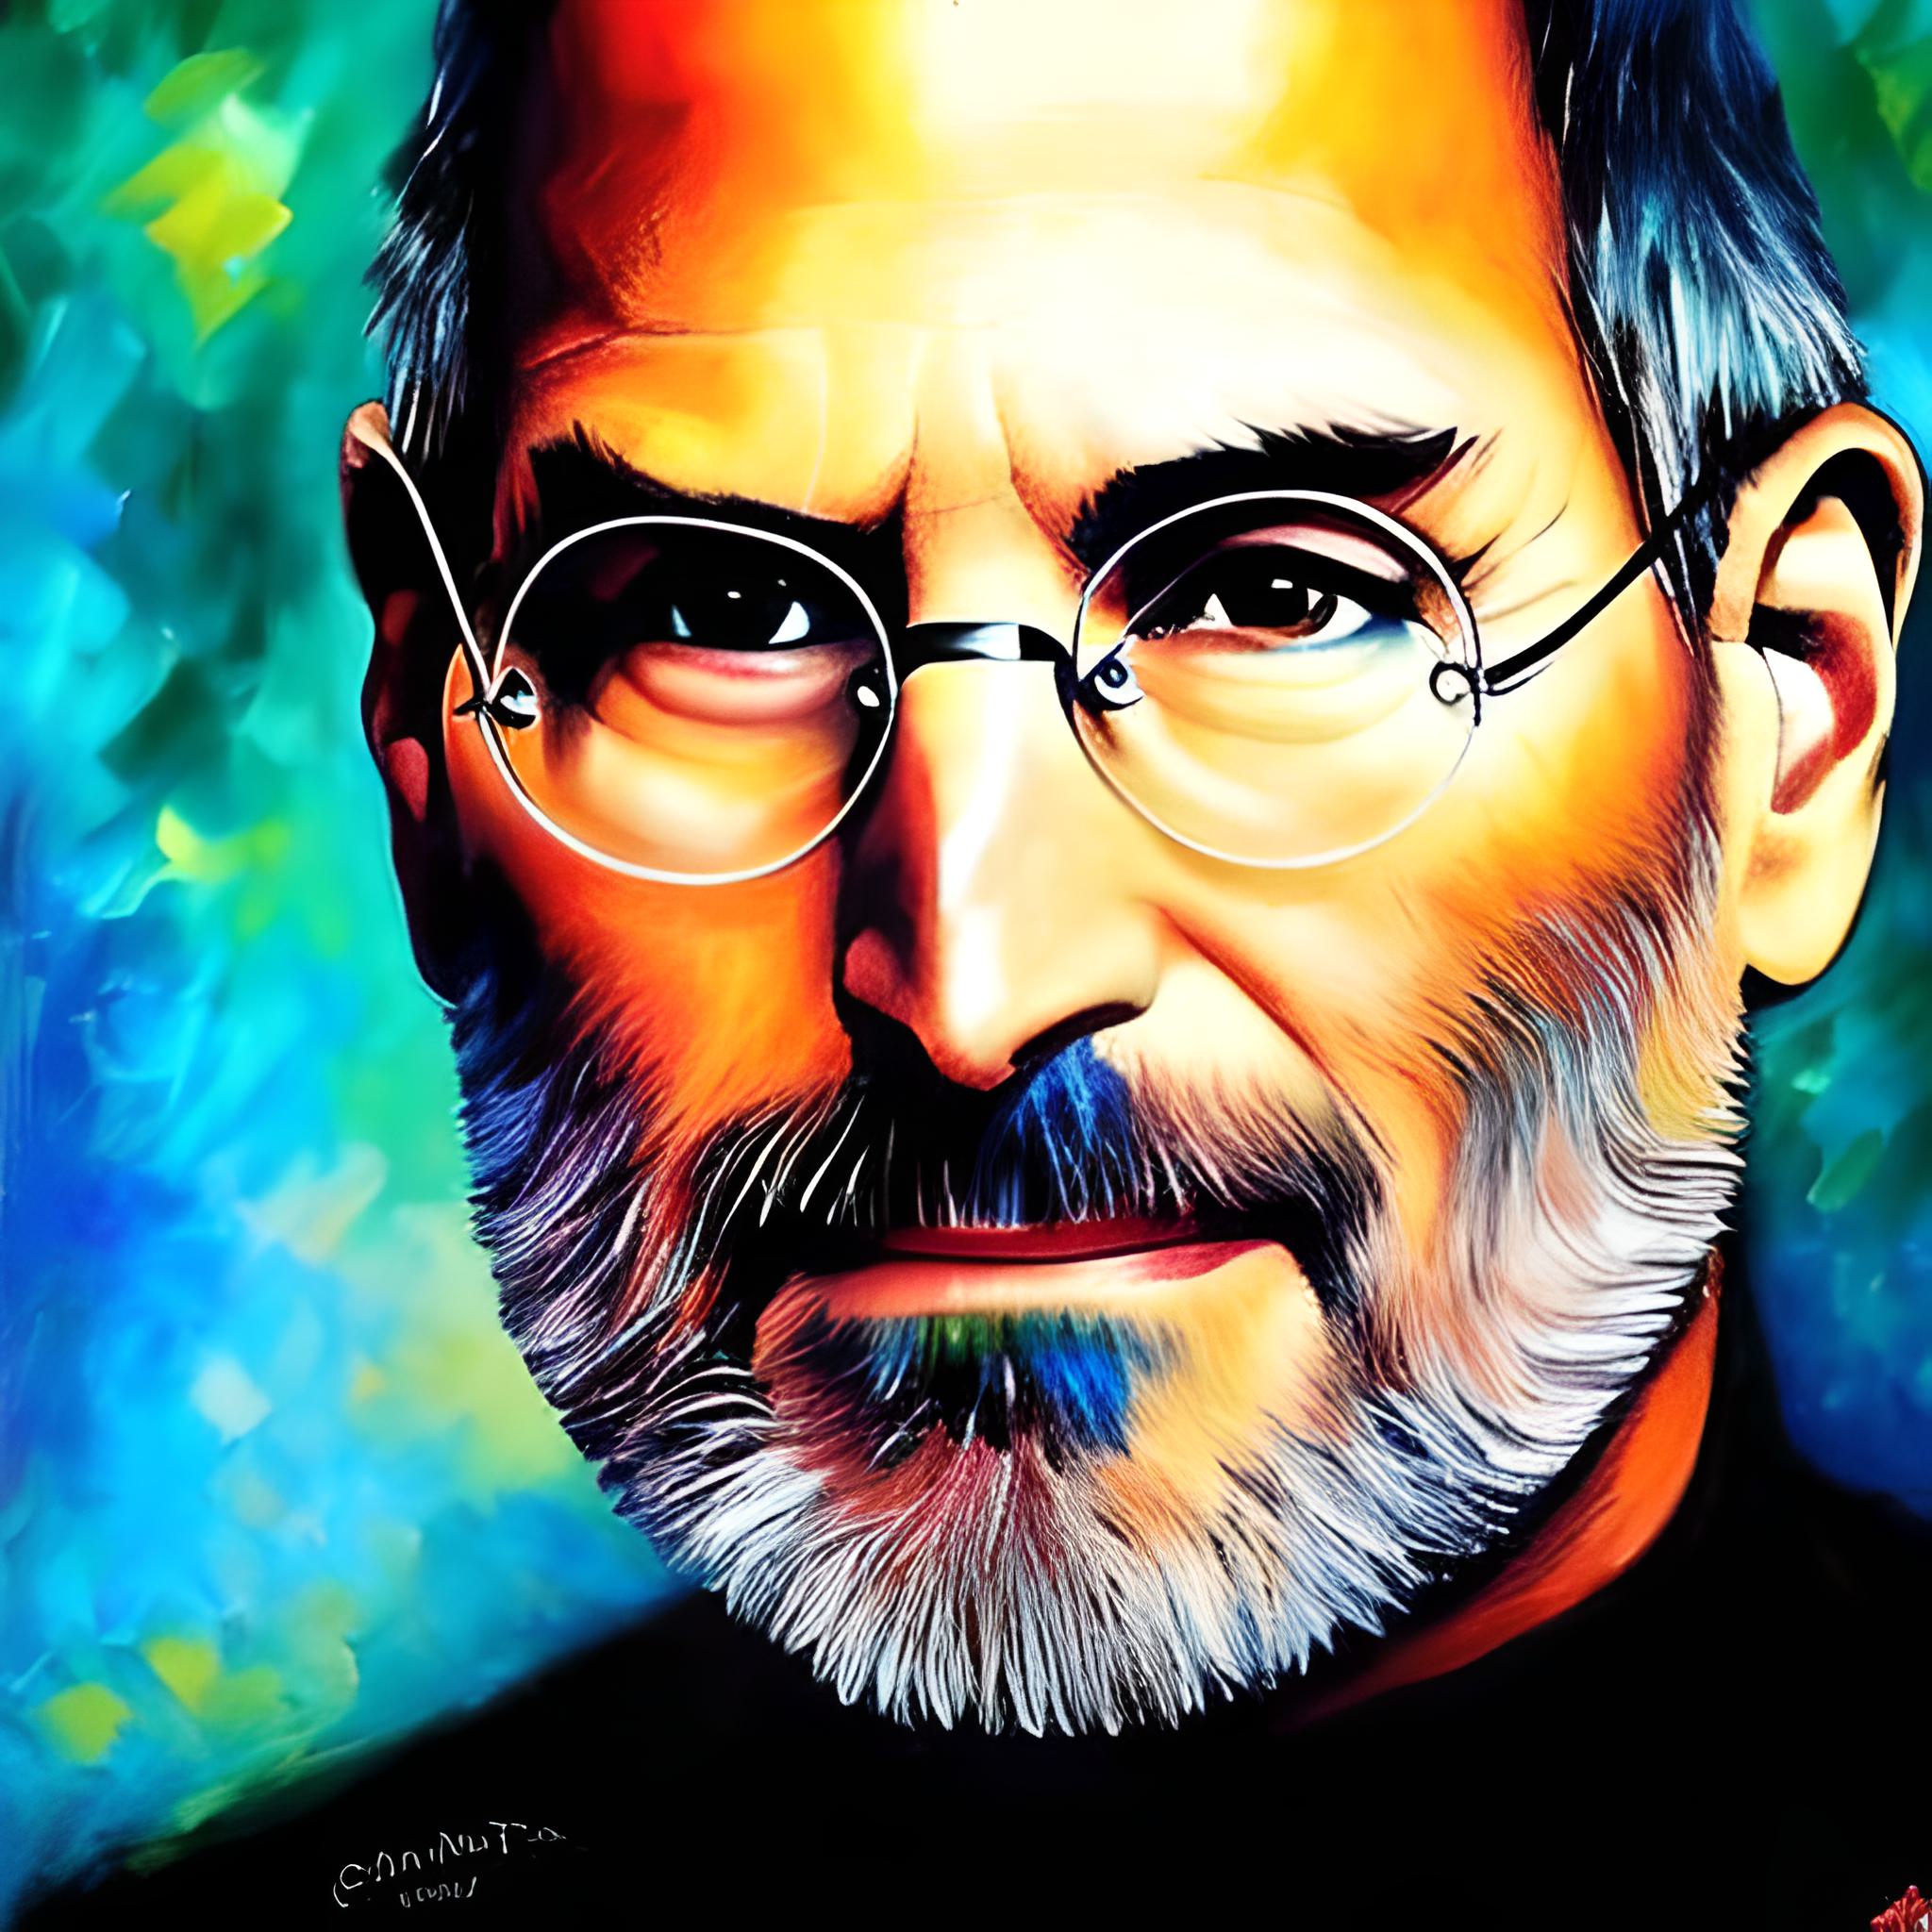 Artistic Picture of Steve Jobs.